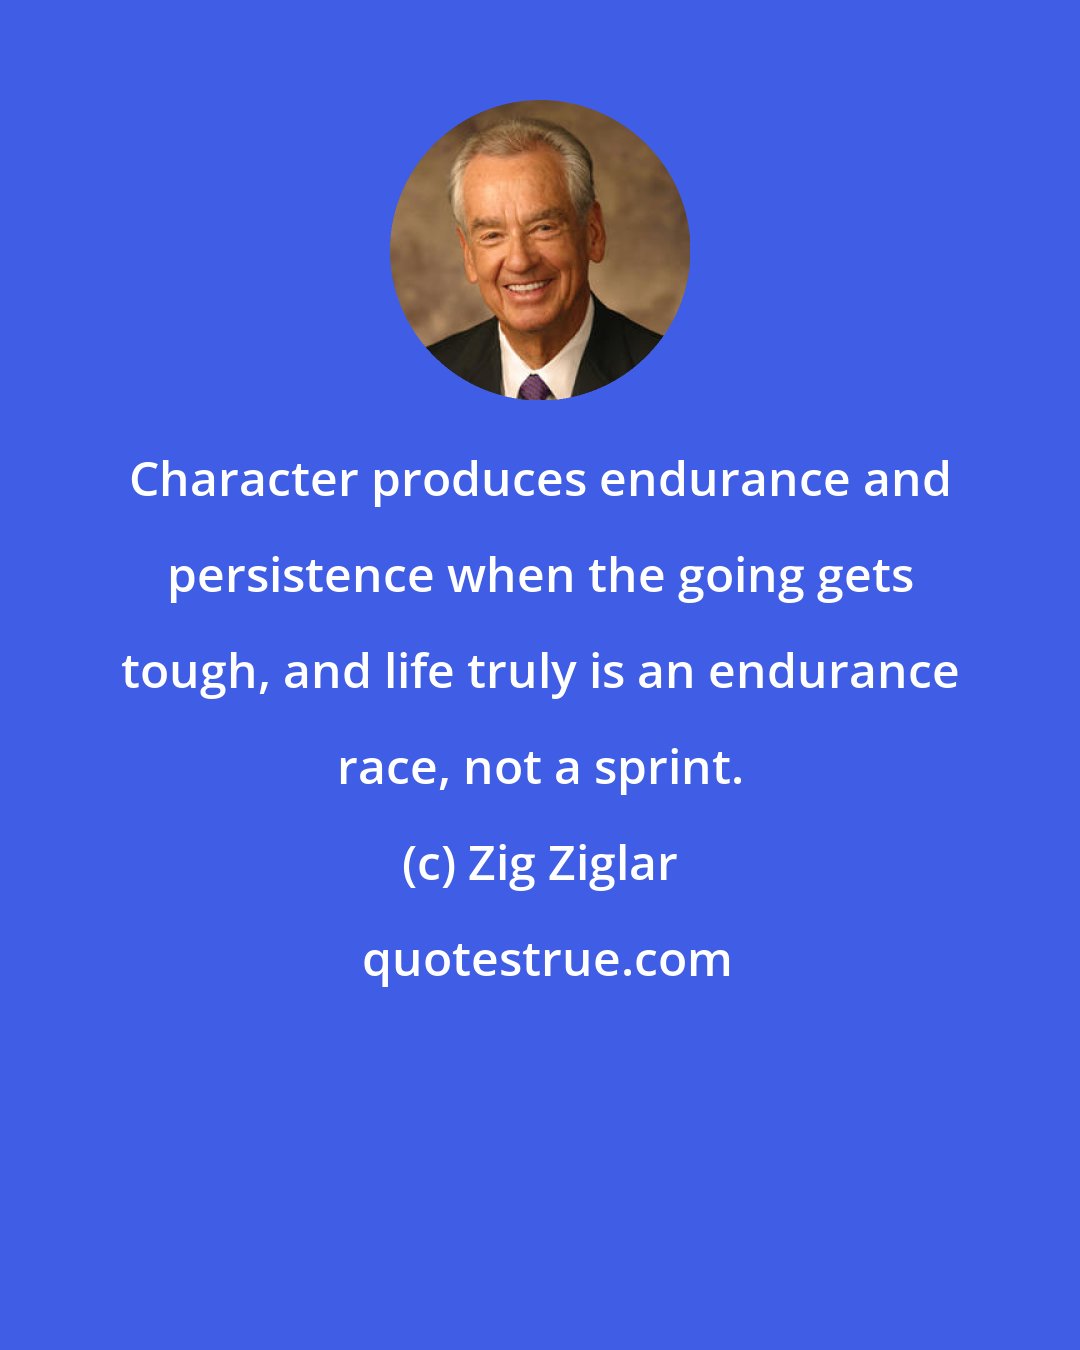 Zig Ziglar: Character produces endurance and persistence when the going gets tough, and life truly is an endurance race, not a sprint.